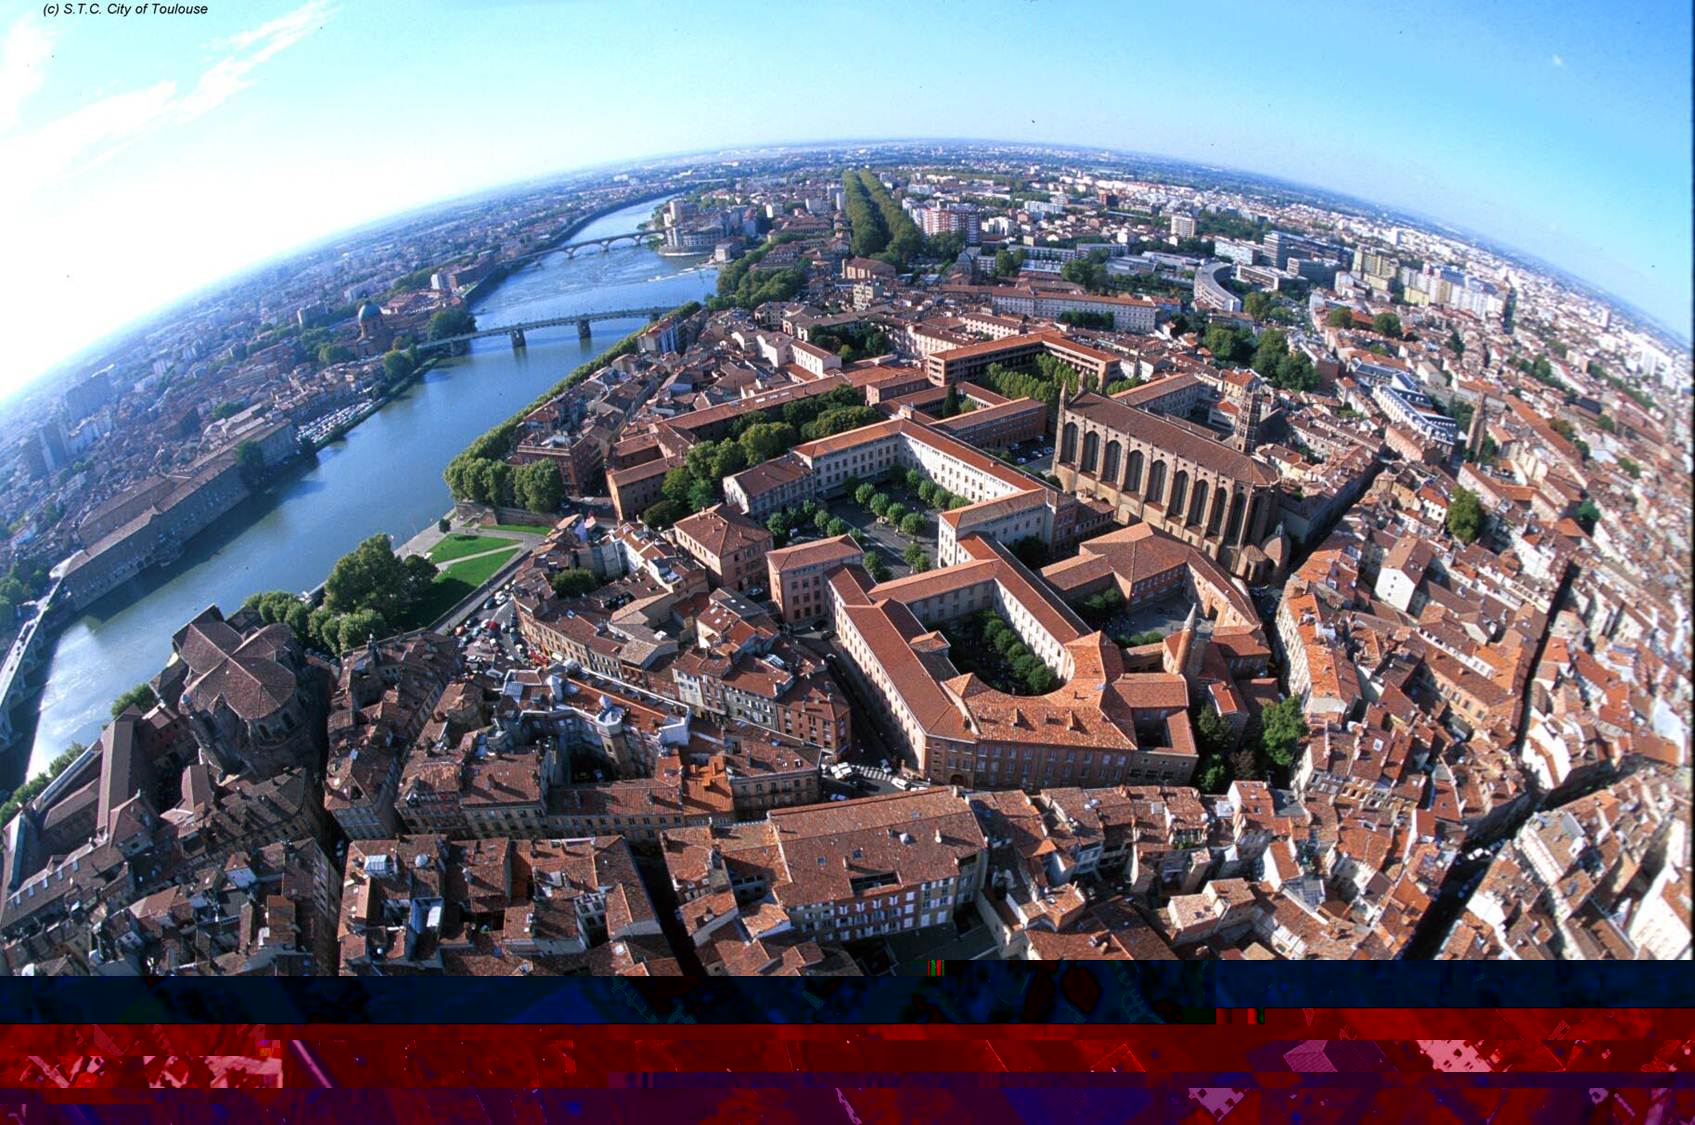 Toulouse from the sky